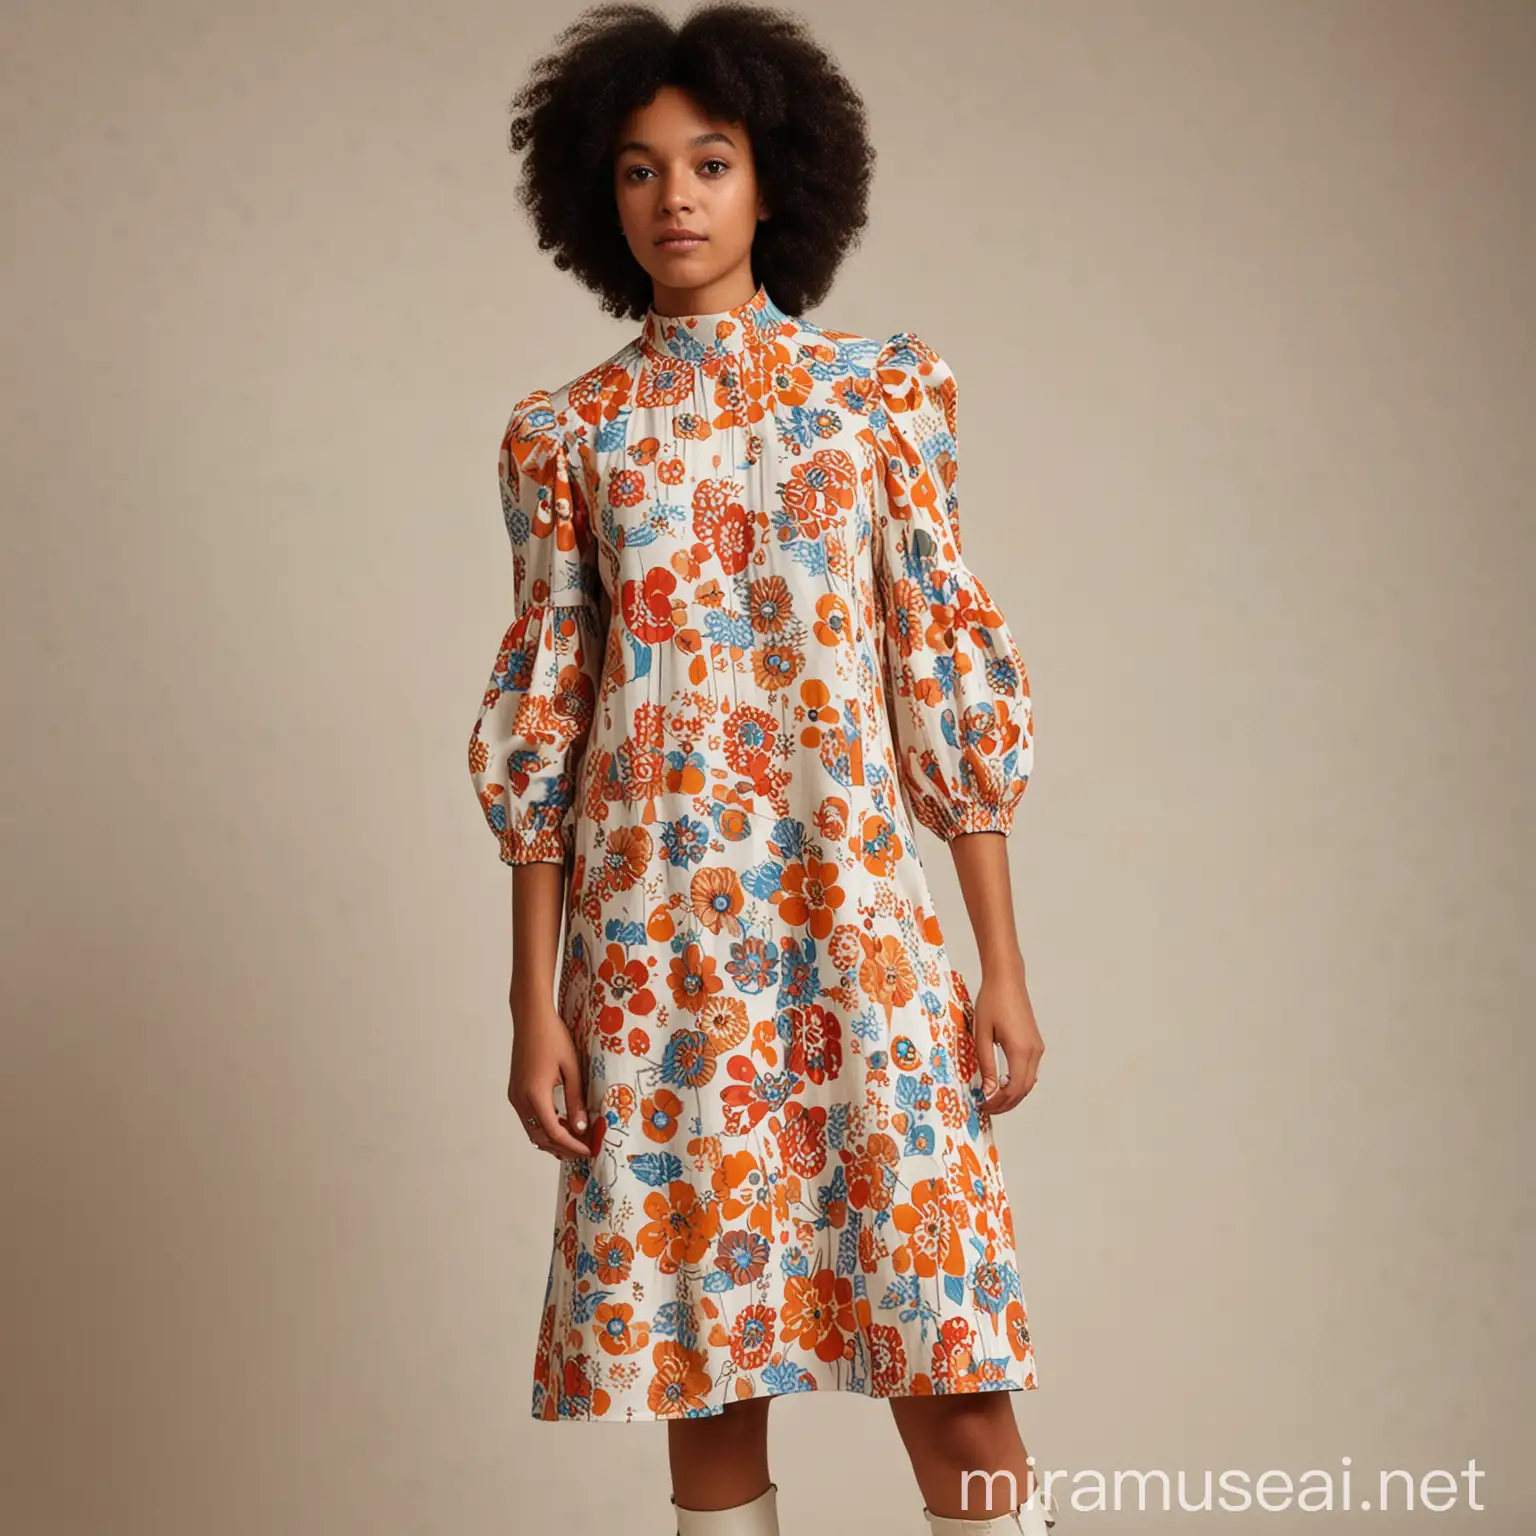 Mixed Race Model in Cotton 70s Summer Dress with Puffy Sleeves